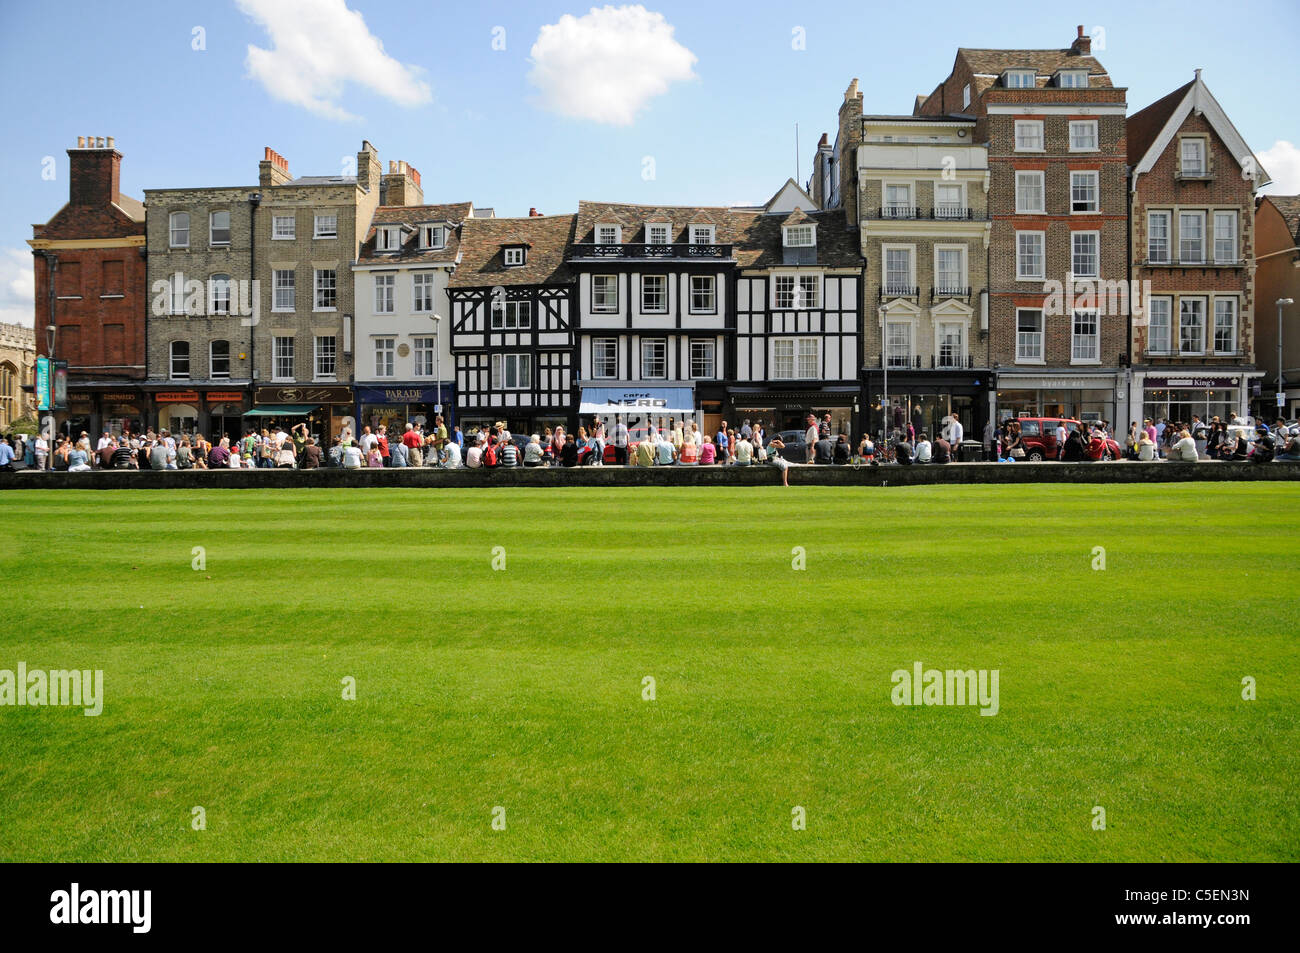 Cambridge historic town center buildings on Kings Parade with college lawn grass freshly cut Stock Photo